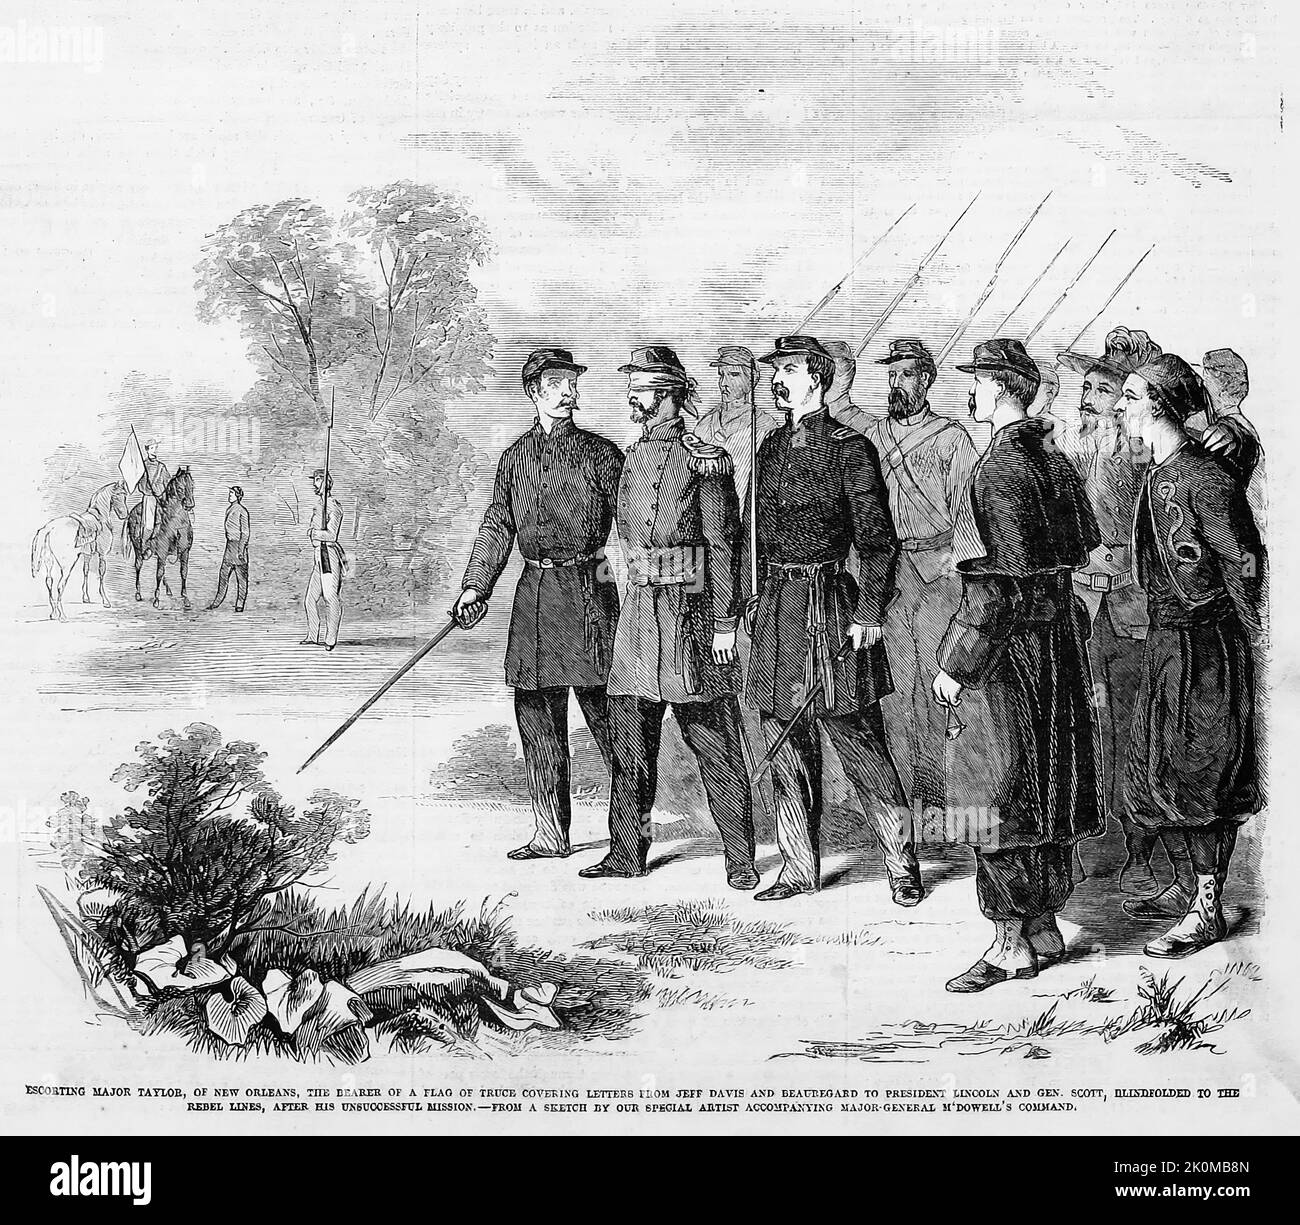 Escorting Major Taylor, of New Orleans, the bearer of a flag of truce covering letters from Jefferson Davis and P. G. T. Beauregard to President Abraham Lincoln and General Winfield Scott, blindfolded to the Rebel lines, after his unsuccessful mission, July 1861. 19th century American Civil War illustration from Frank Leslie's Illustrated Newspaper Stock Photo